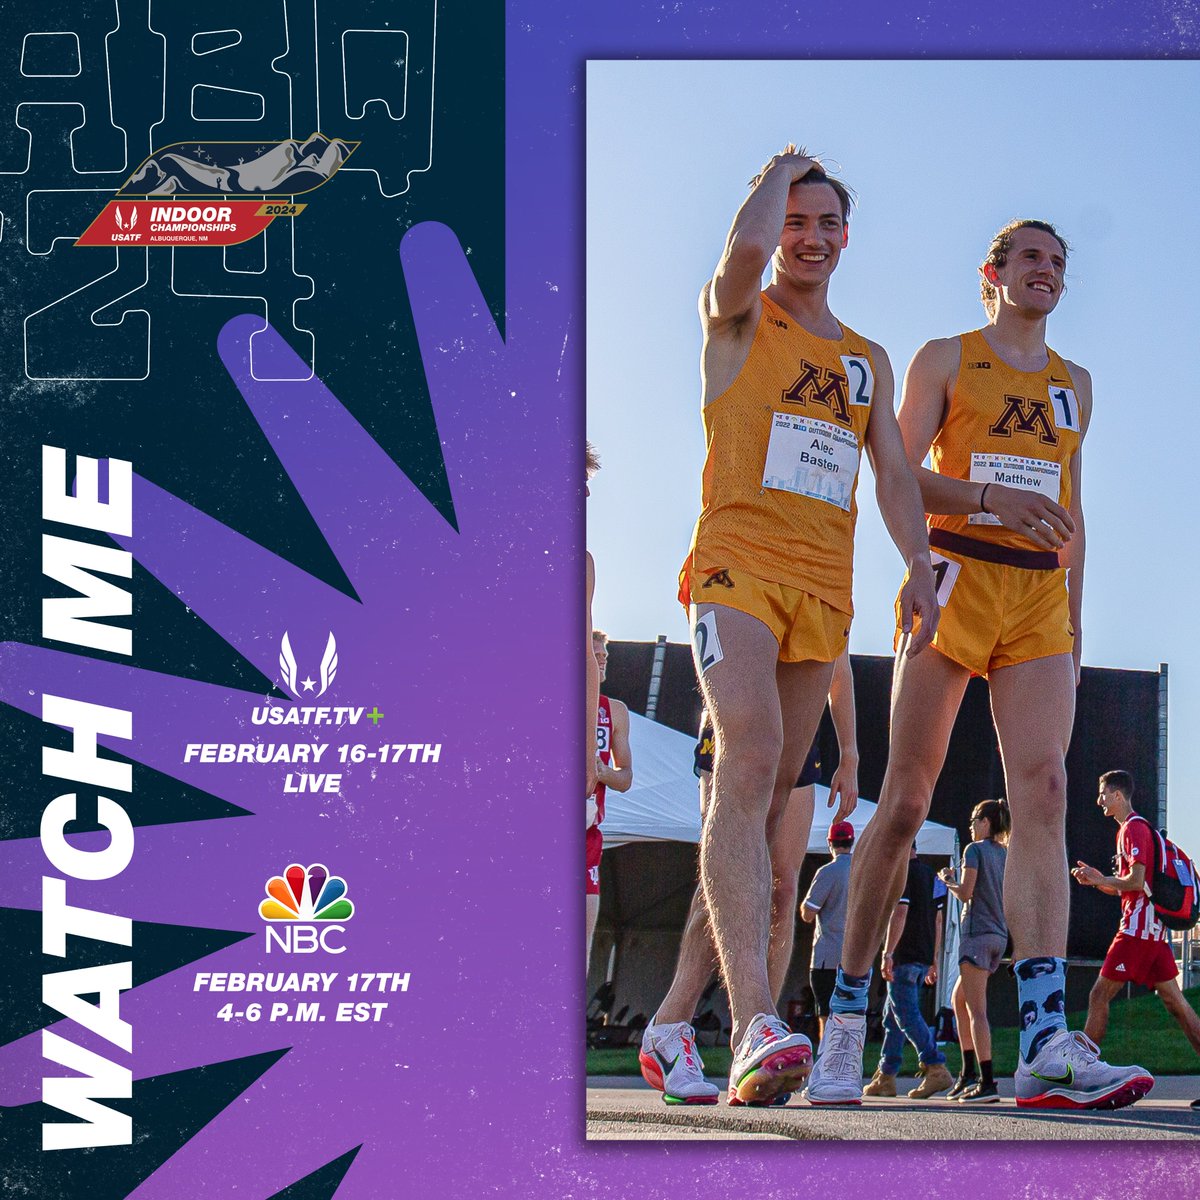 It's late, but our #Gophers are out competing in the ABQ! Matthew Wilkinson and Alec Basten run in the 3K at the @usatf Indoor Championships starting at 8:59 p.m. CT! #USATFIndoor 

LIVE RESULTS: z.umn.edu/wUSAind24
WATCH ($): z.umn.edu/waUSAp24